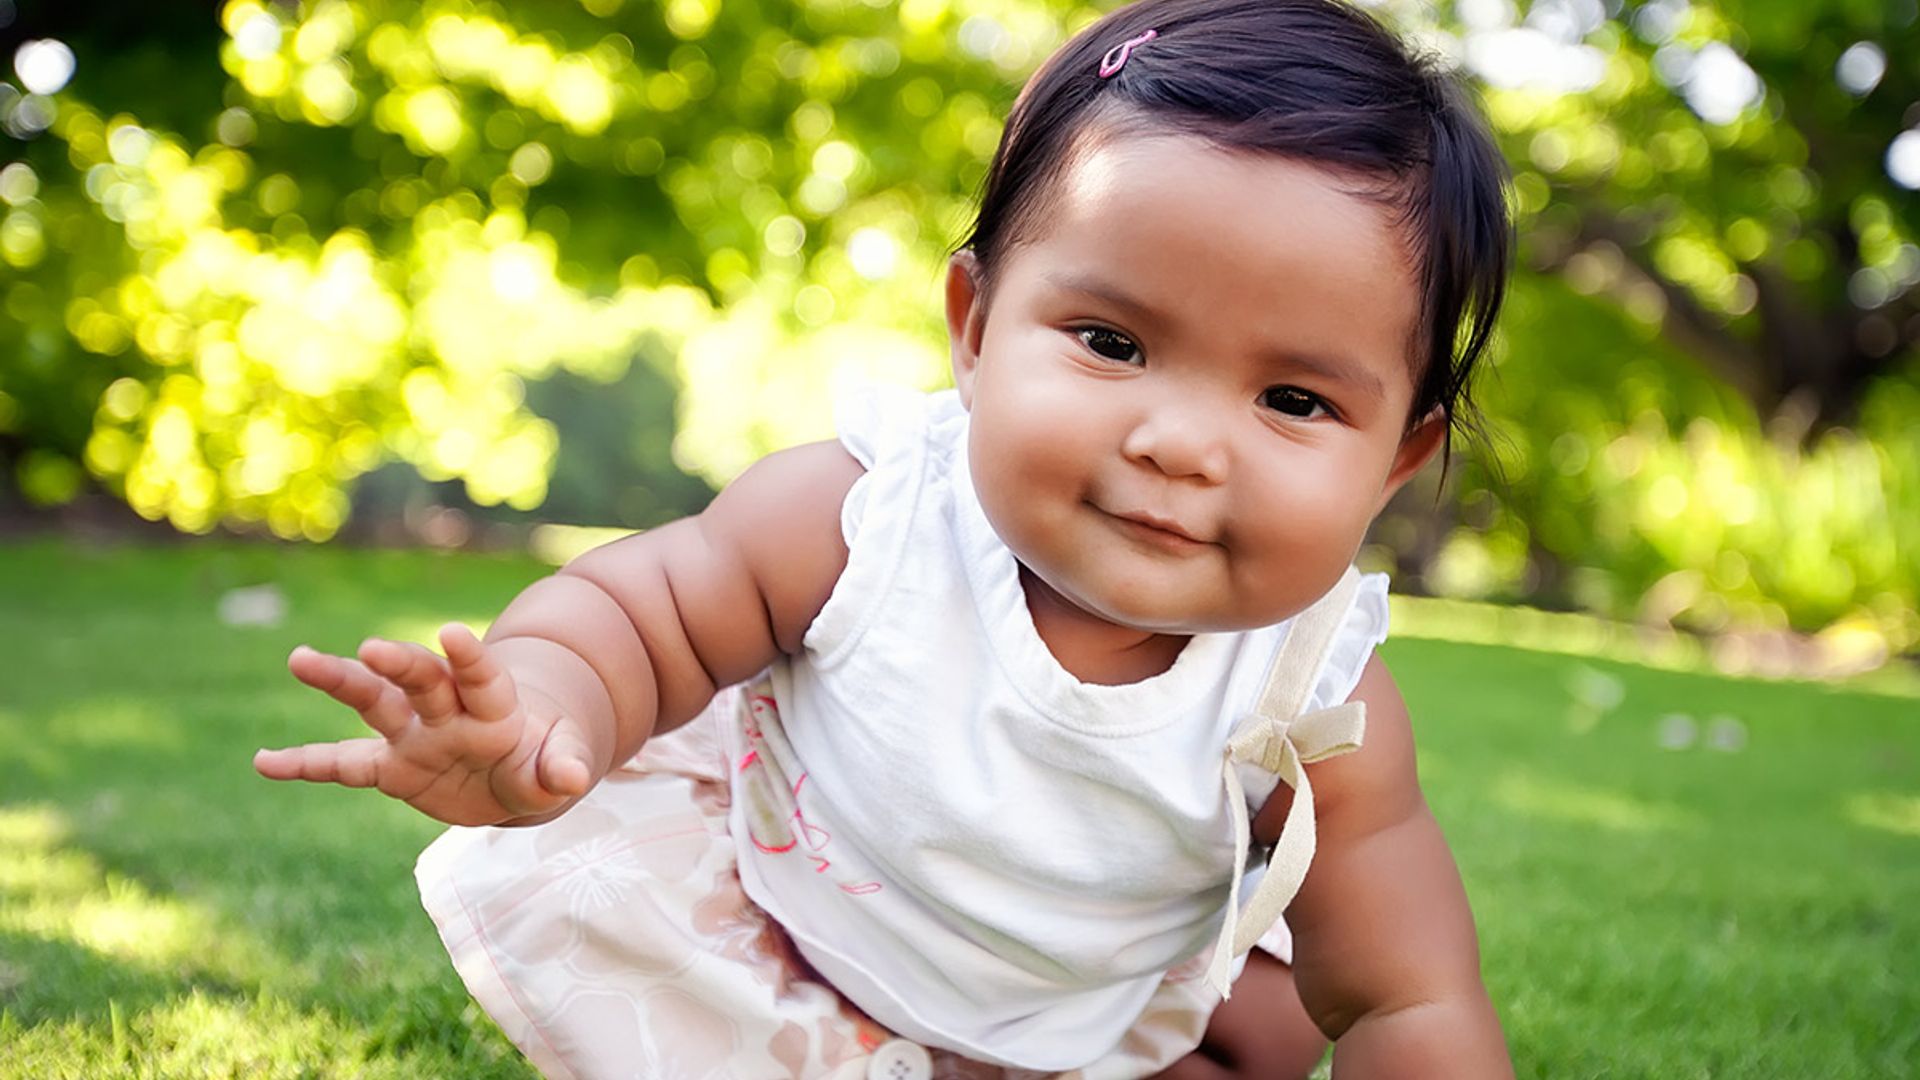 The top 20 coolest baby names for boys and girls in 2020 – and they're eco-friendly too!